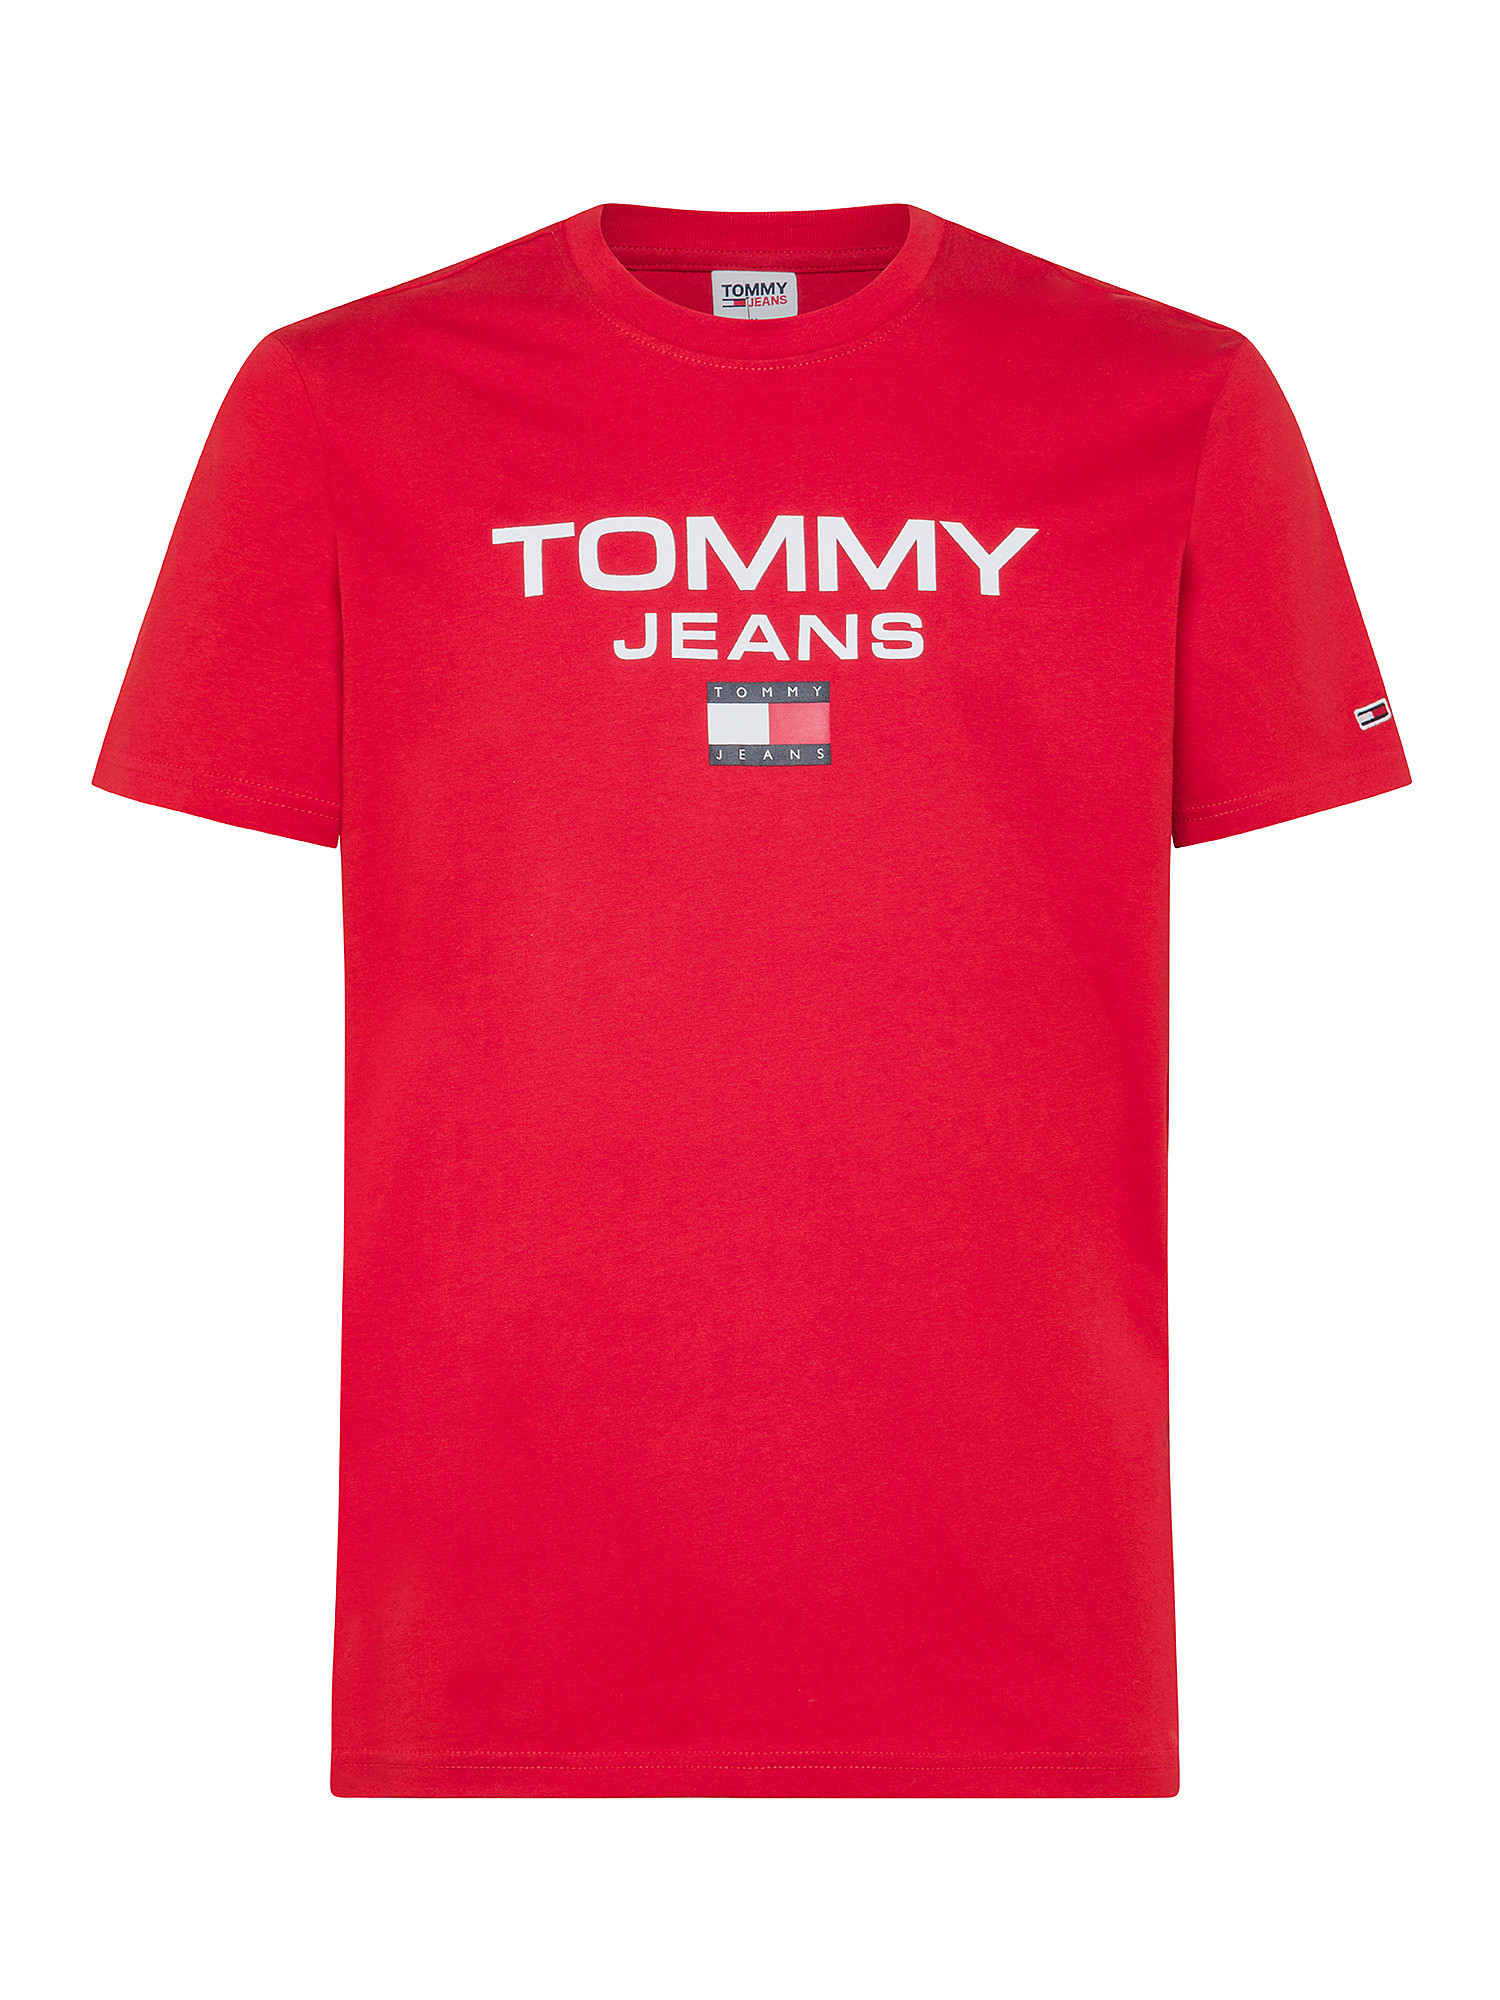 Tommy Jeans - Crew neck cotton T-shirt with print and logo, Red, large image number 0